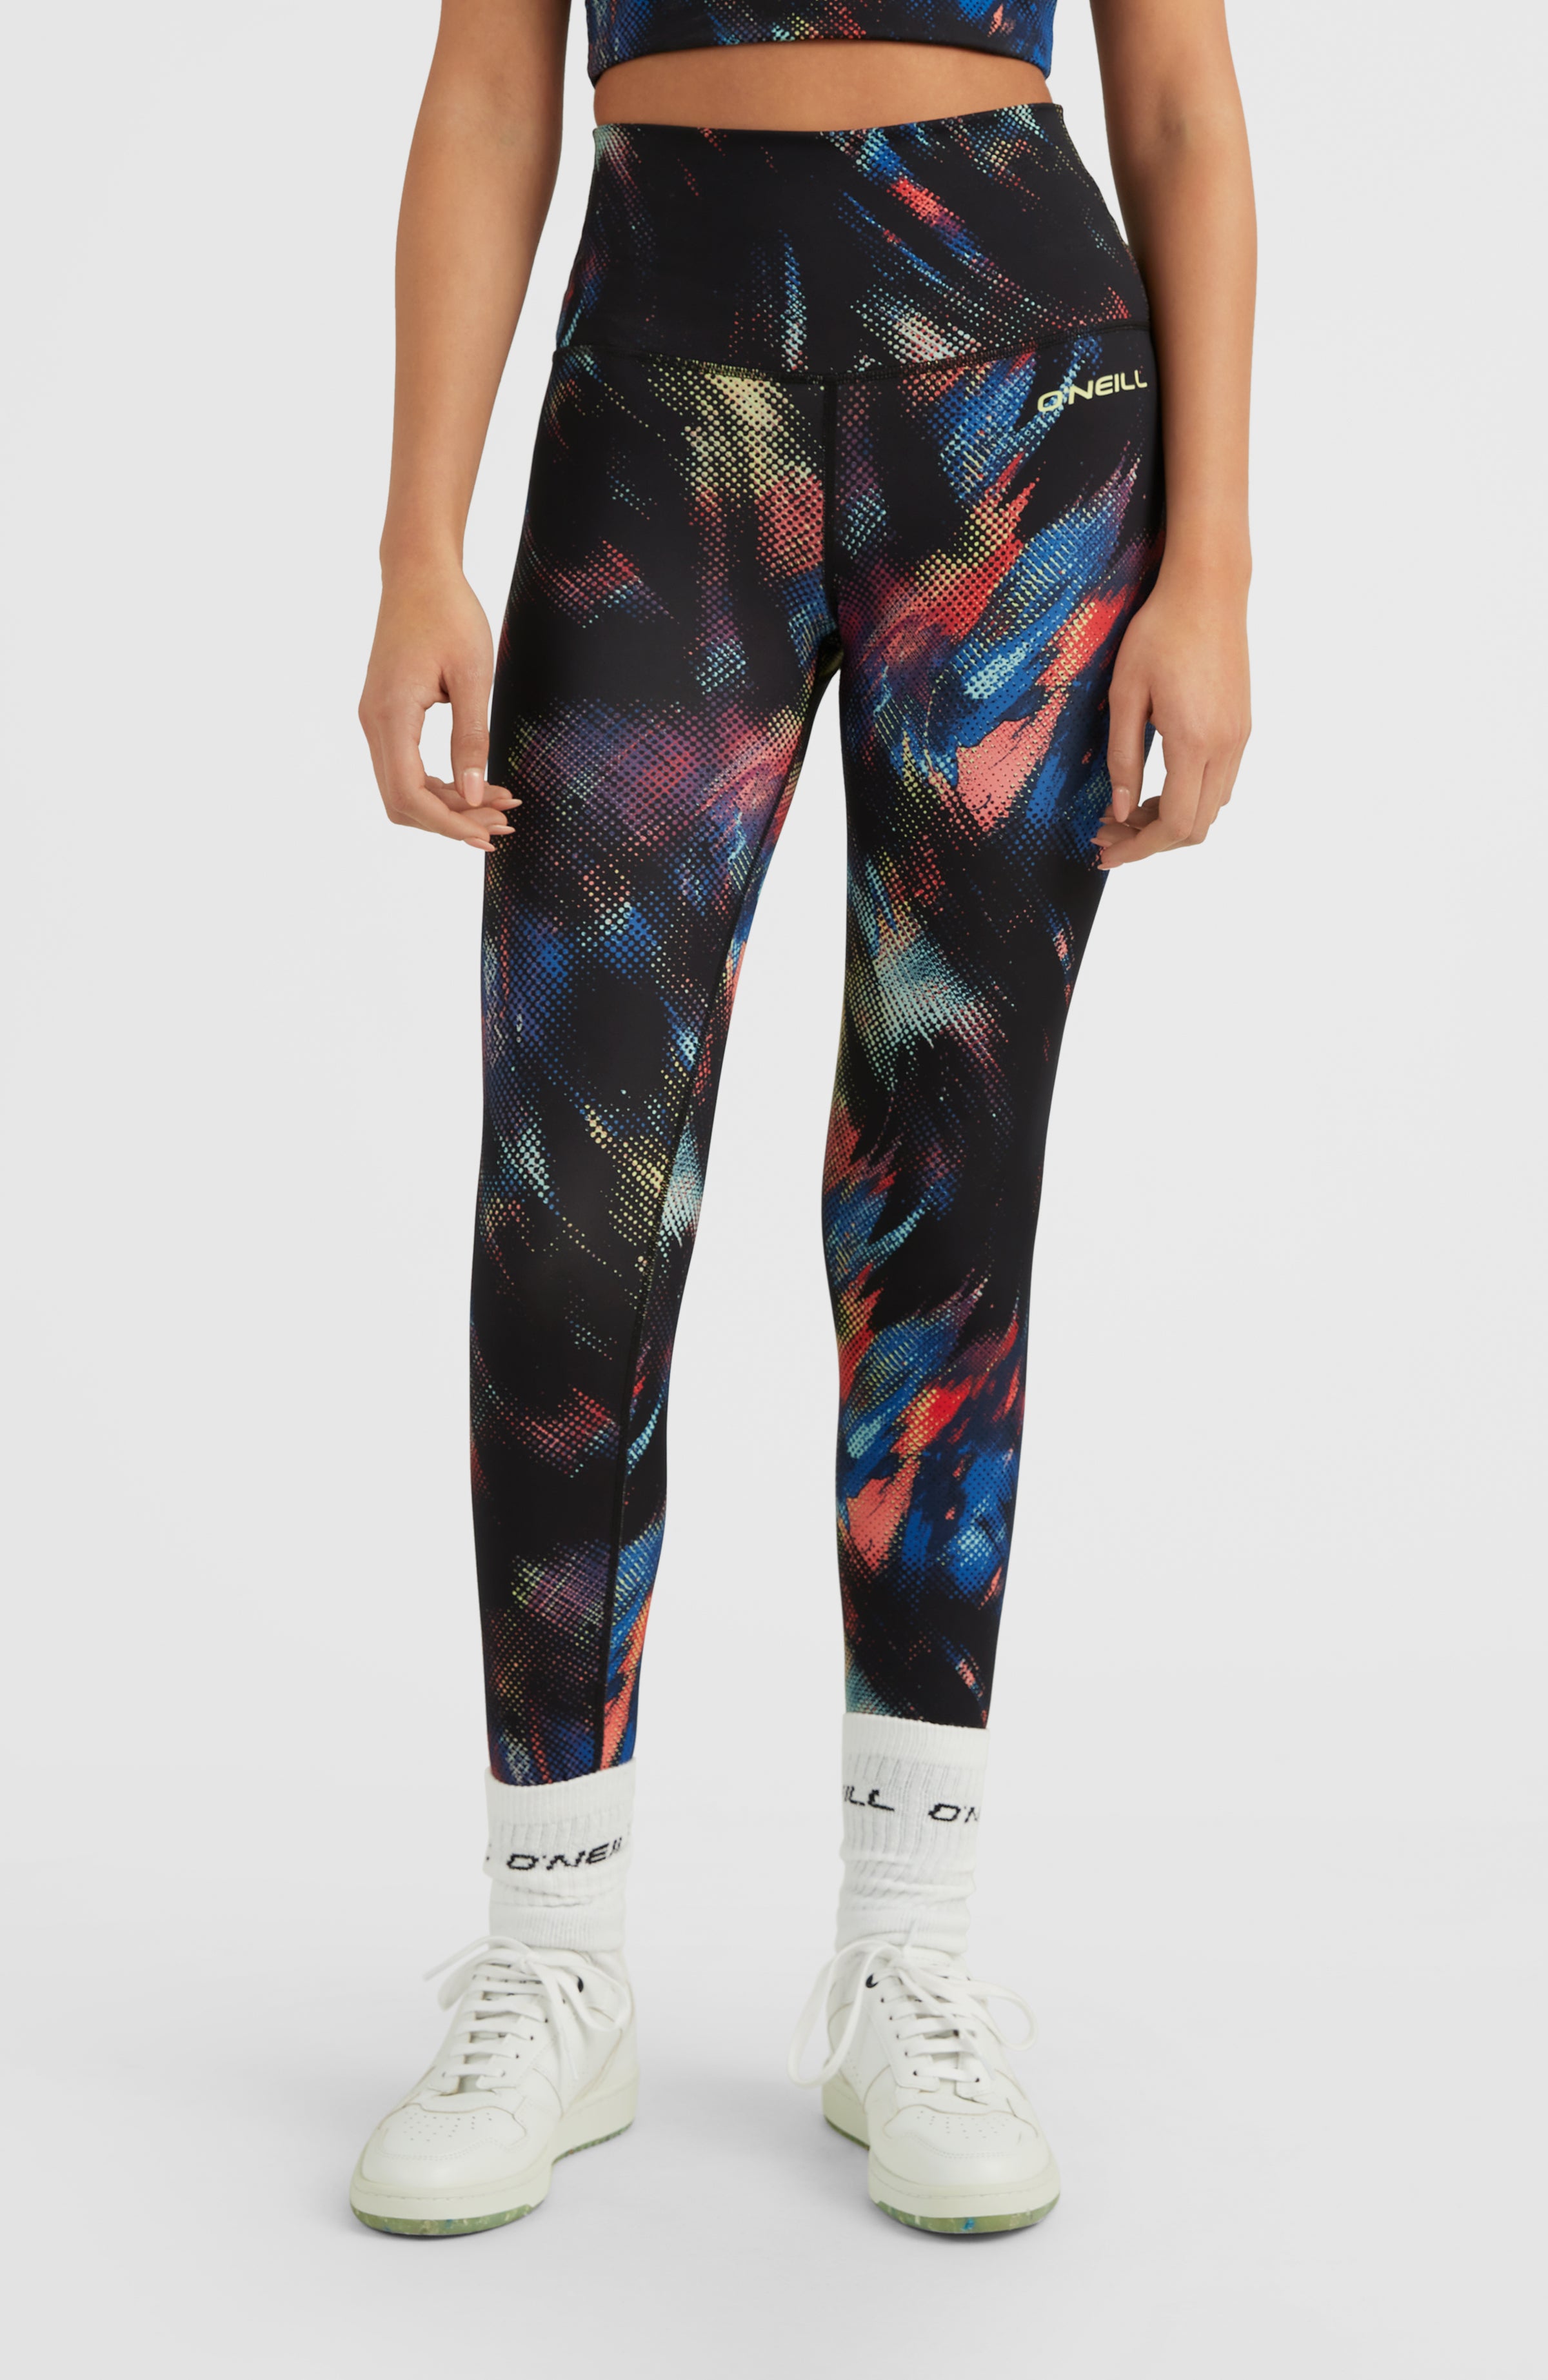 Shoppers Say These $10  Leggings Are “Soft As Air”